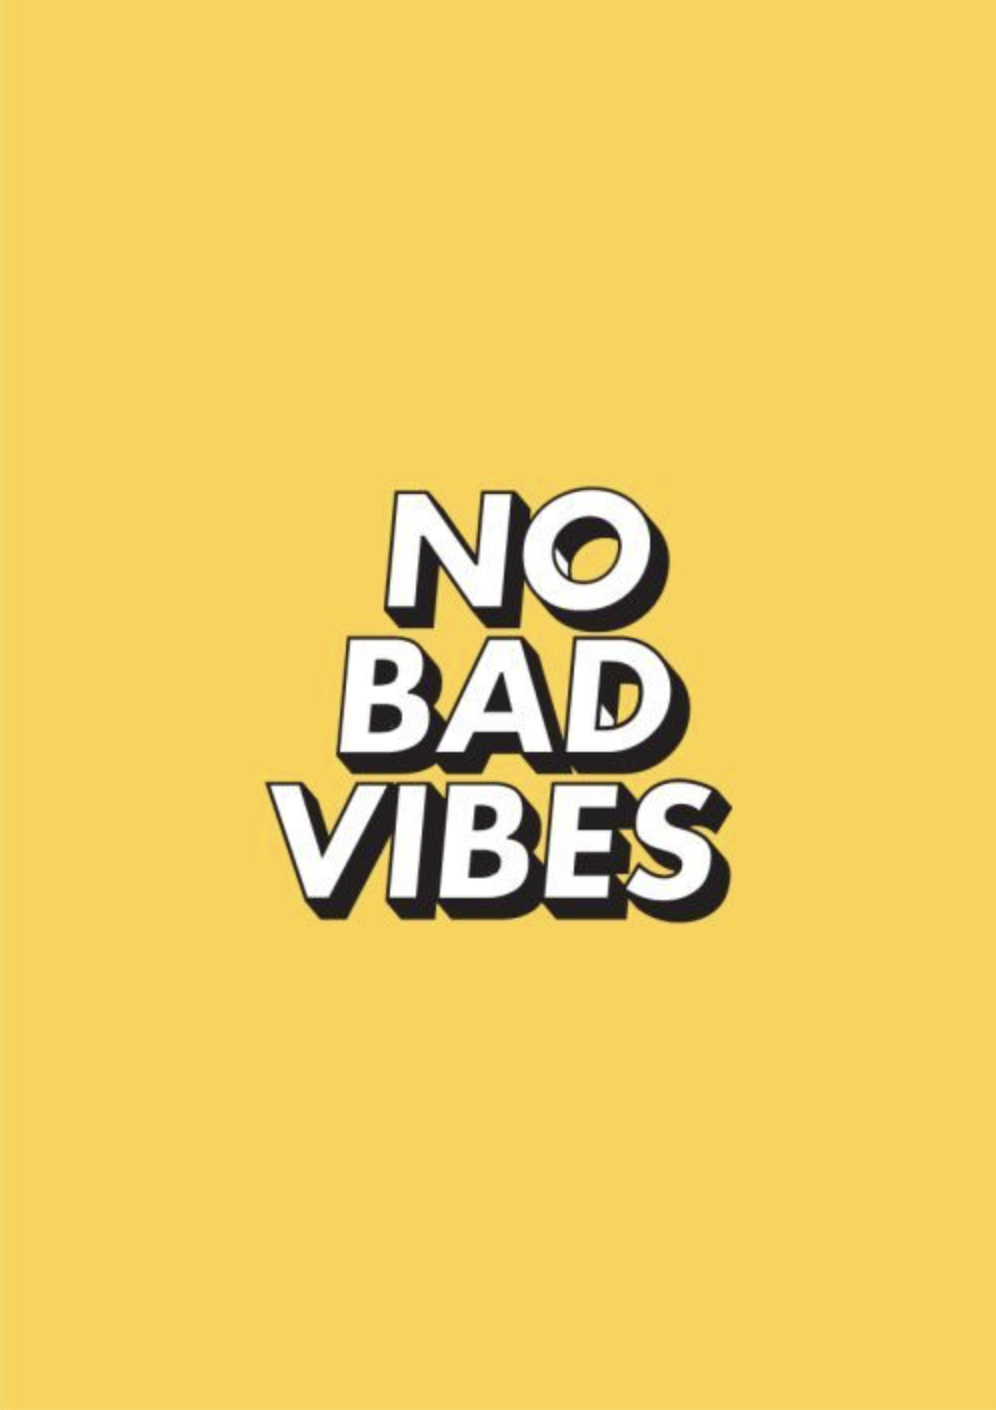 Good Vibes Only Quotes Pinterest Wallpaper Iphone Wallpaper - You Know The  Vibes - 996x1410 Wallpaper 